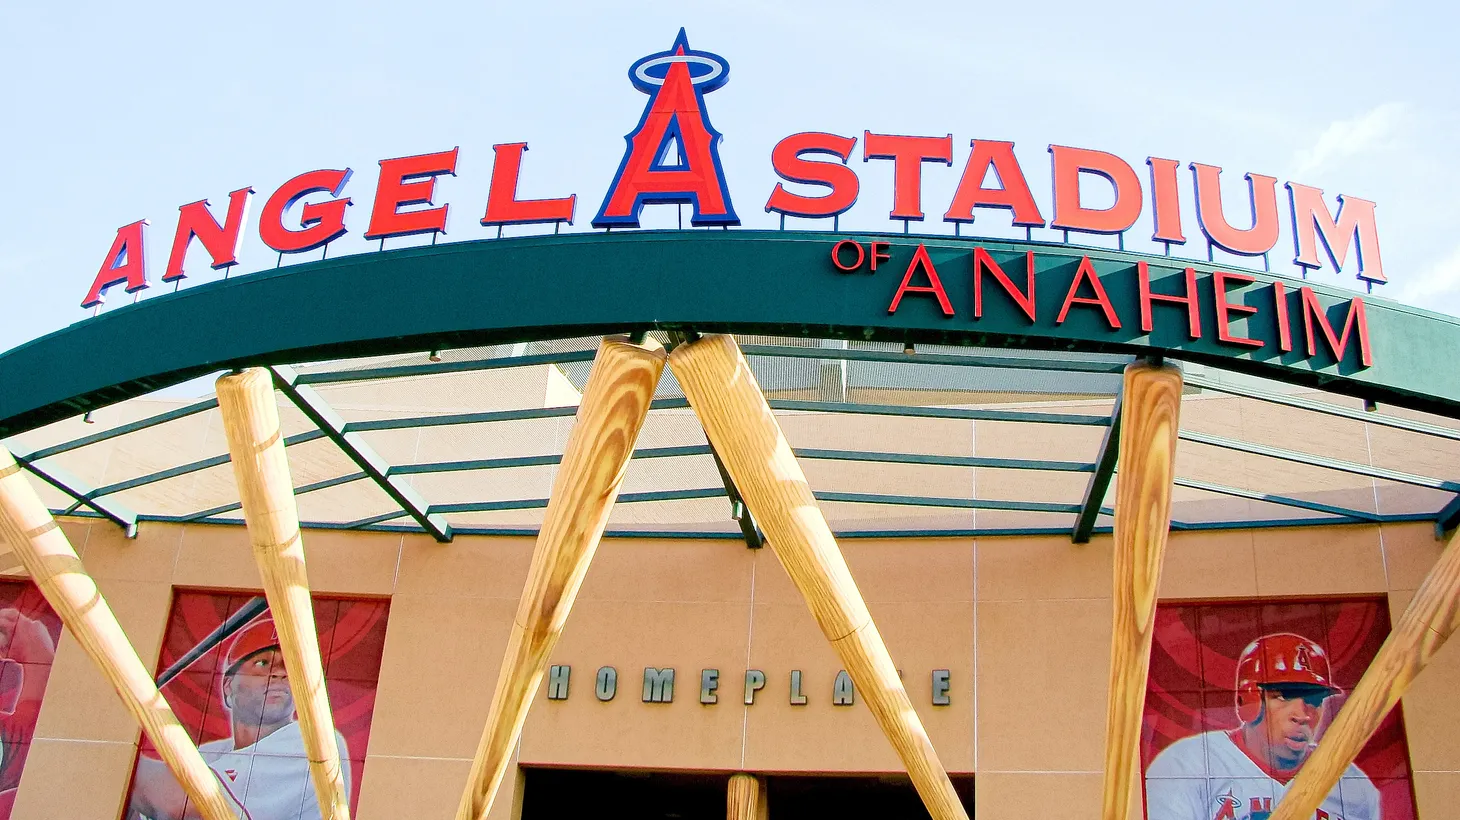 “Henry Samueli, if you're listening, come on, man. Angel Stadium is right across the way from the Honda Center. Just buy the team already. Heaven knows you have the money,” LA Times columnist Gustavo Arellano pleads for the Angel’s OC future.